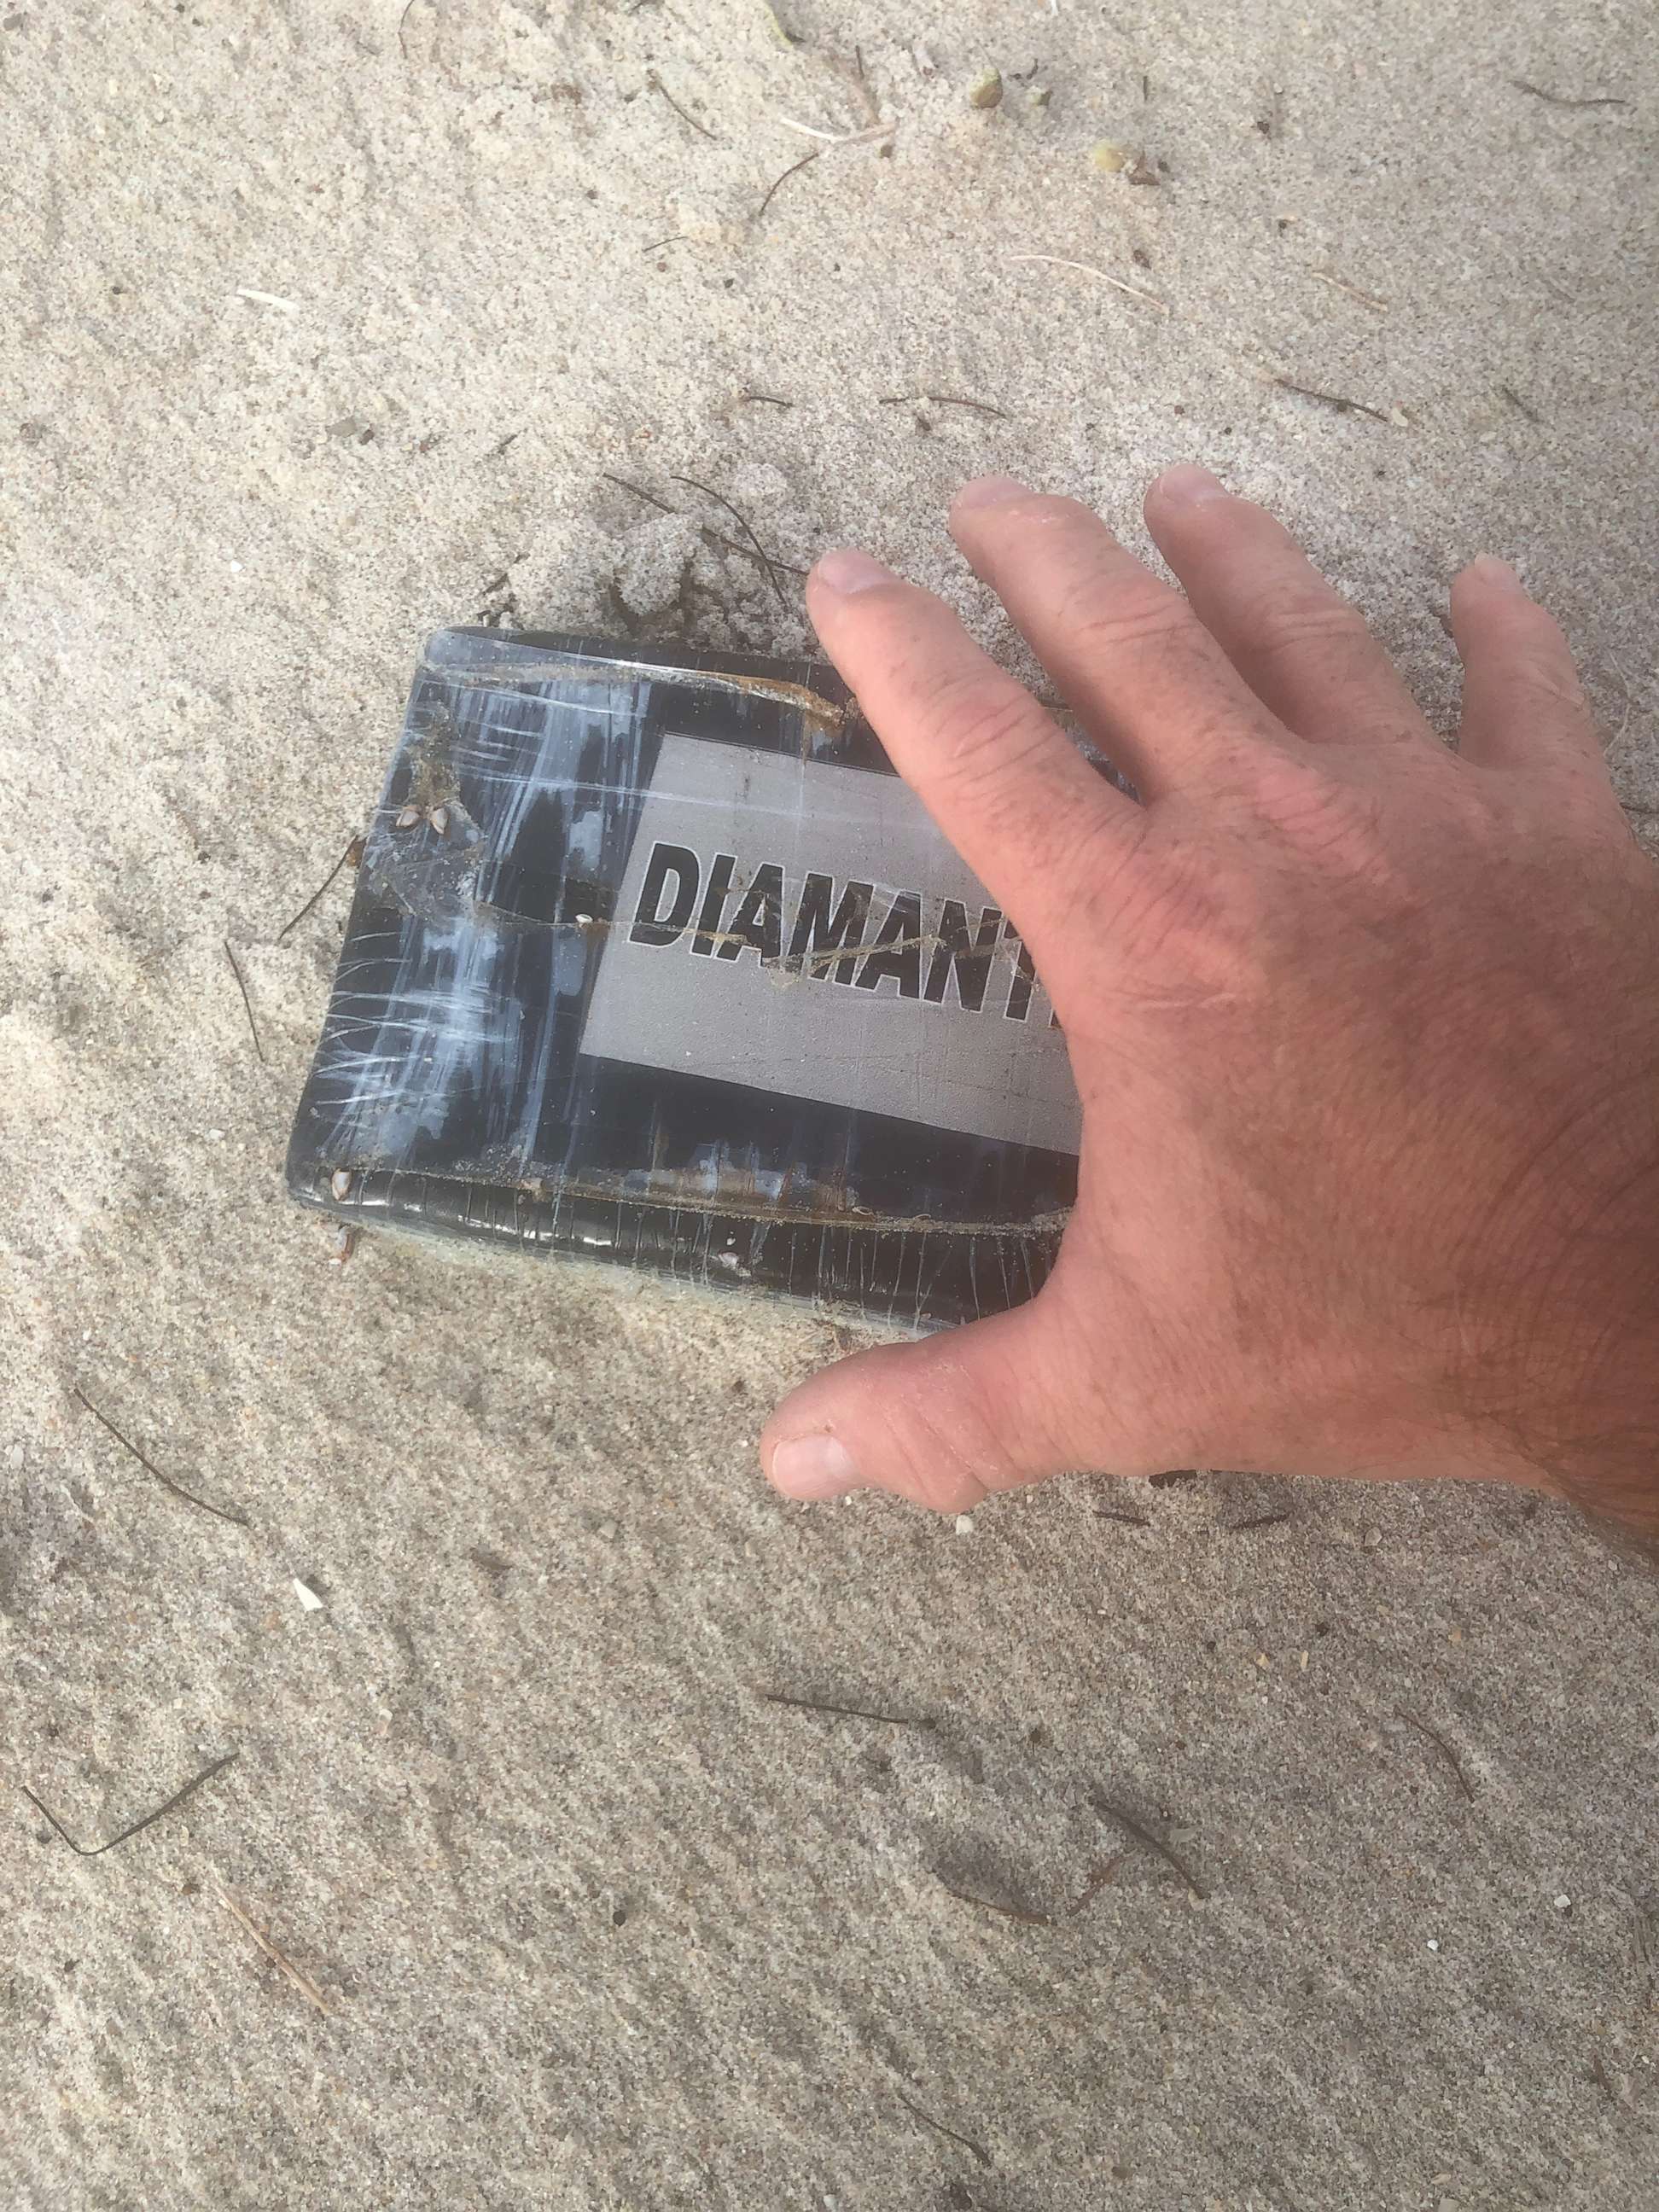 PHOTO: A kilo of cocaine was found near Paradise Beach Park in Melbourne, Florida after Hurricane Dorian passed through on Sept. 3, 2019.